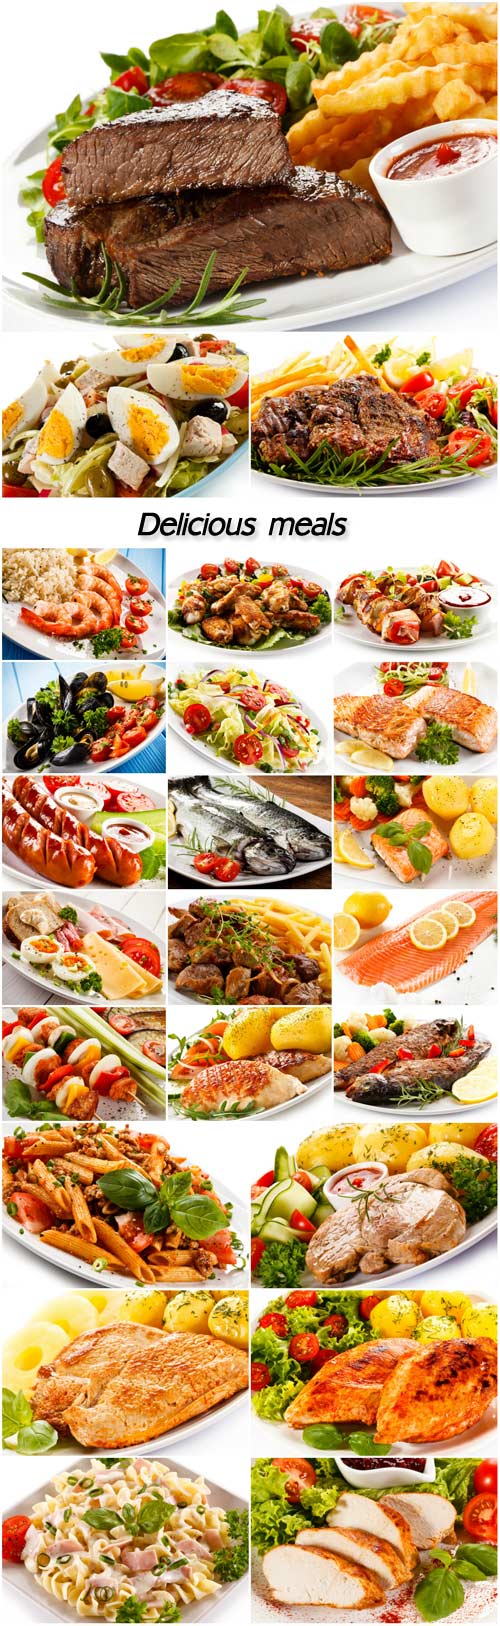 Delicious meals, meat, vegetables, seafood